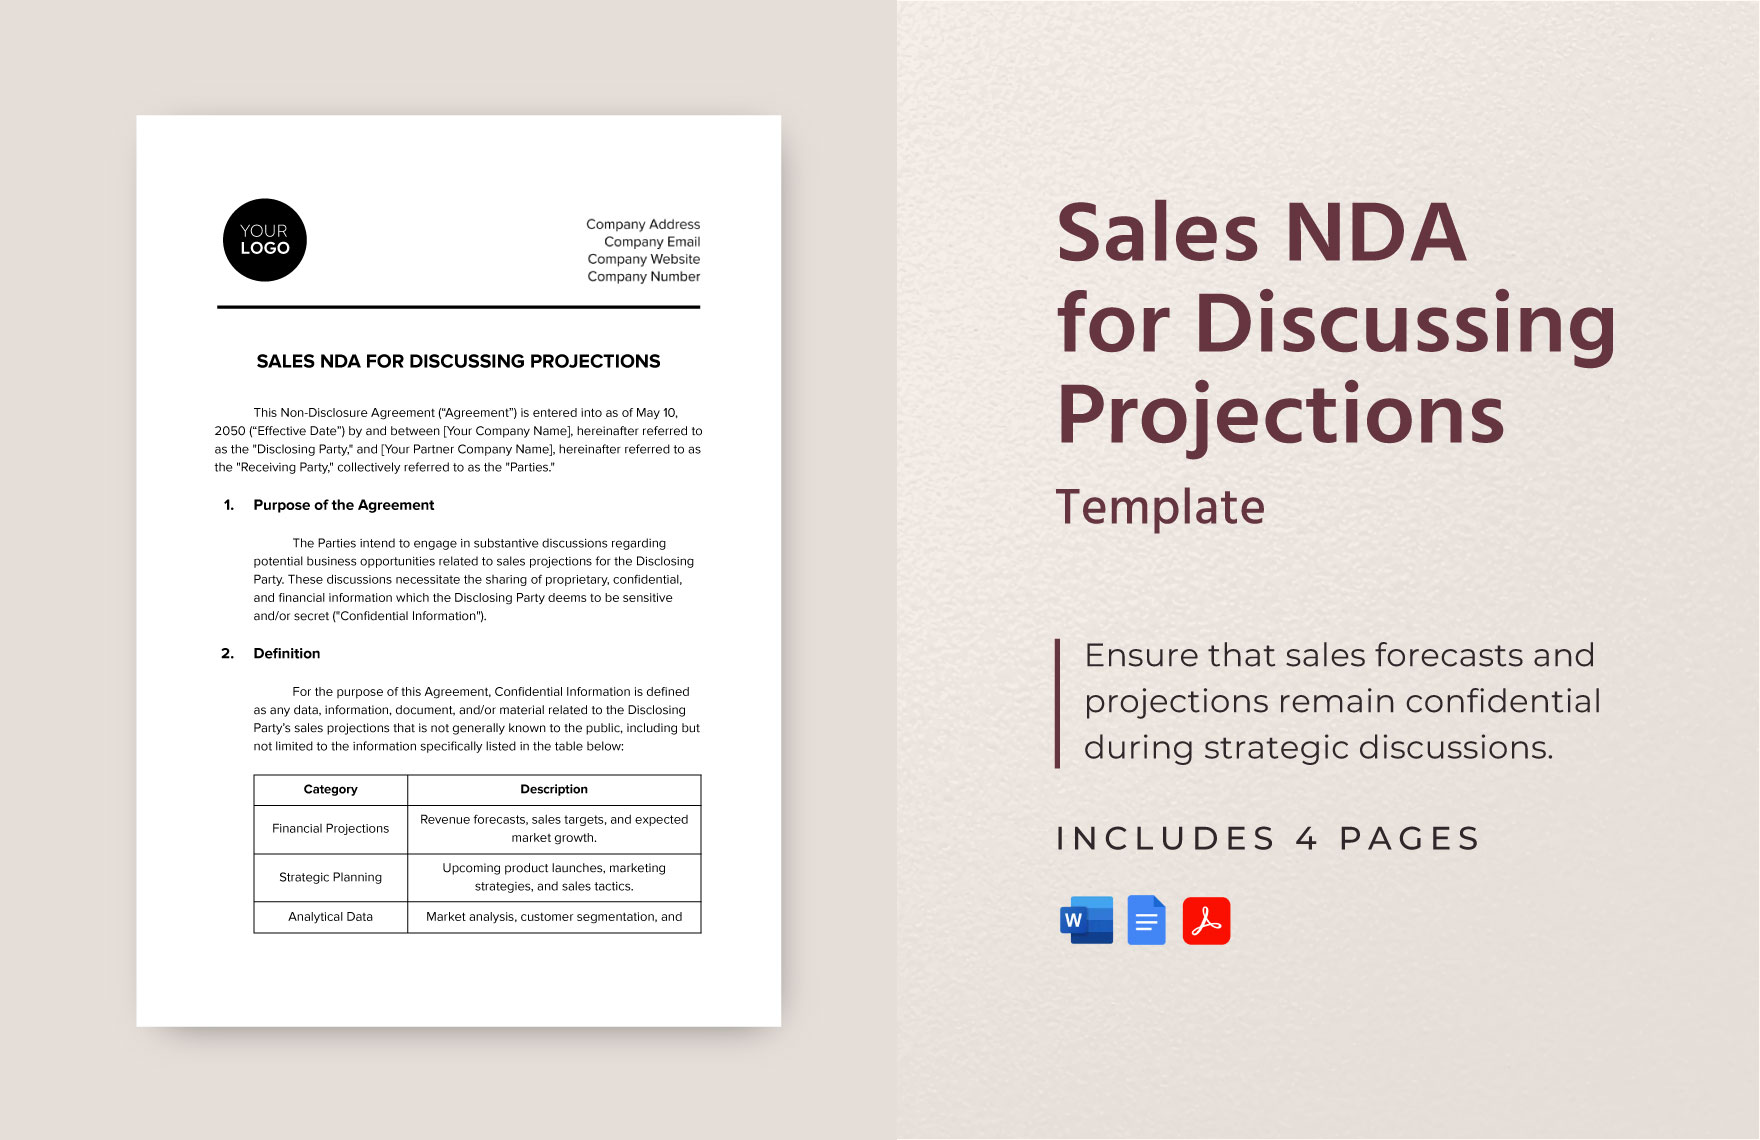 Sales NDA for Discussing Projections Template